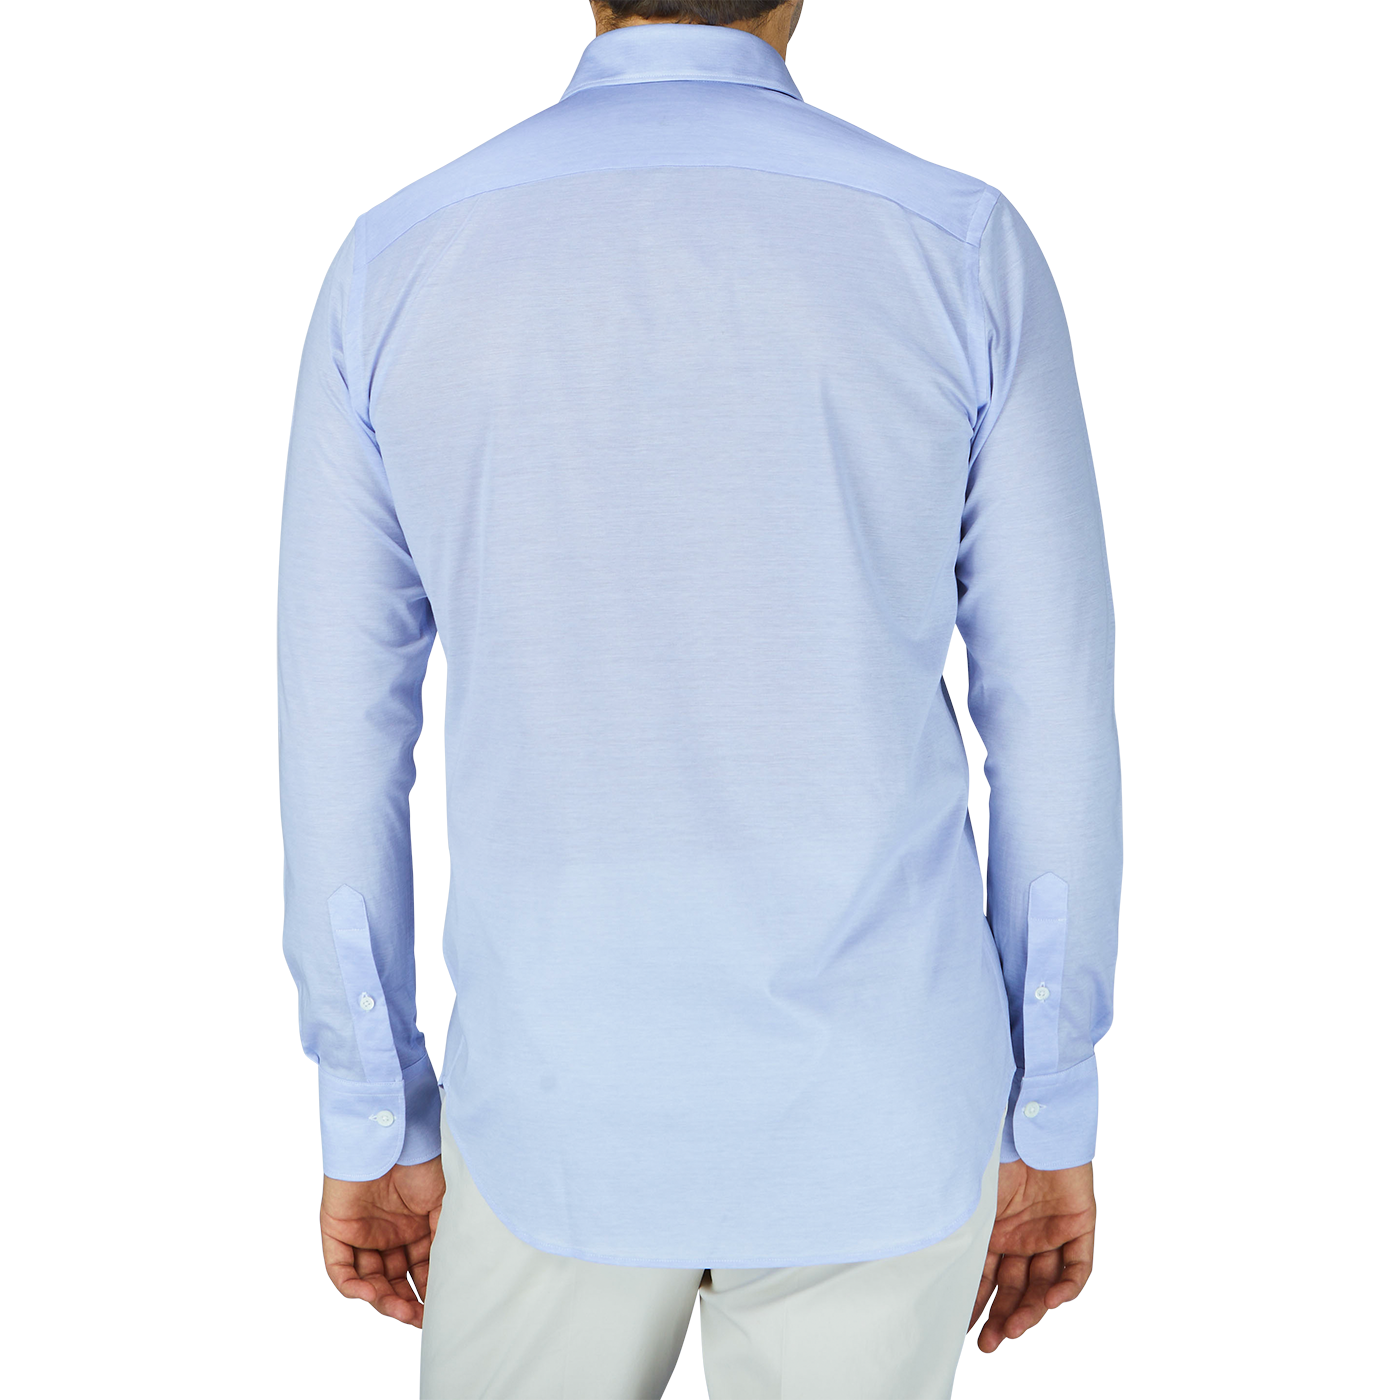 The back view of a contemporary man in a light blue Canali cotton jersey casual shirt.